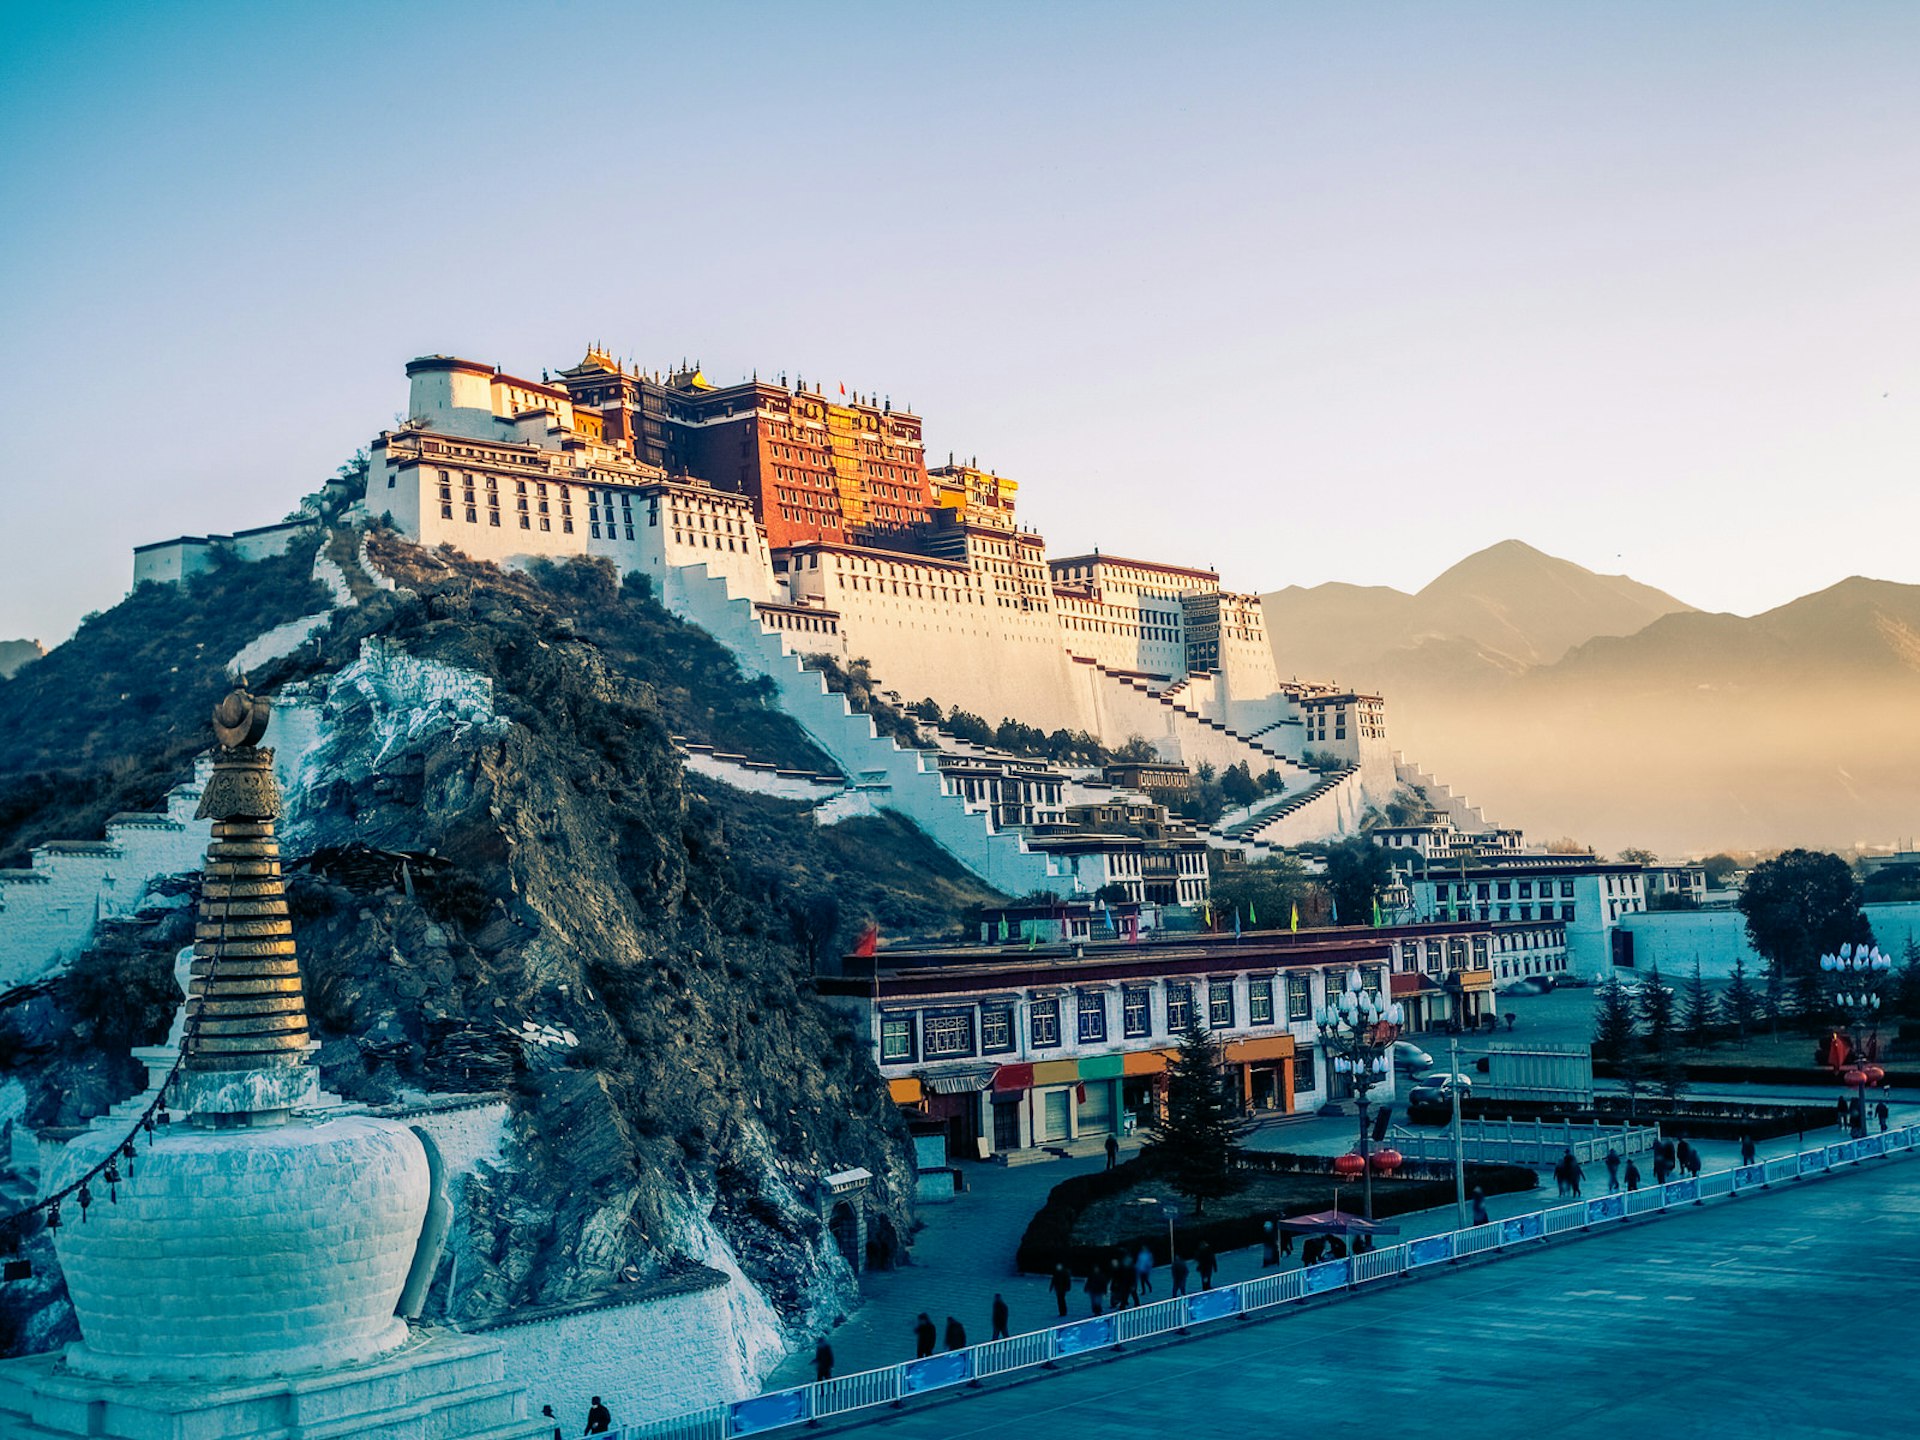 Final destination: Lhasa, home of the magnificent Potala Palace © hfzimages / Shutterstock